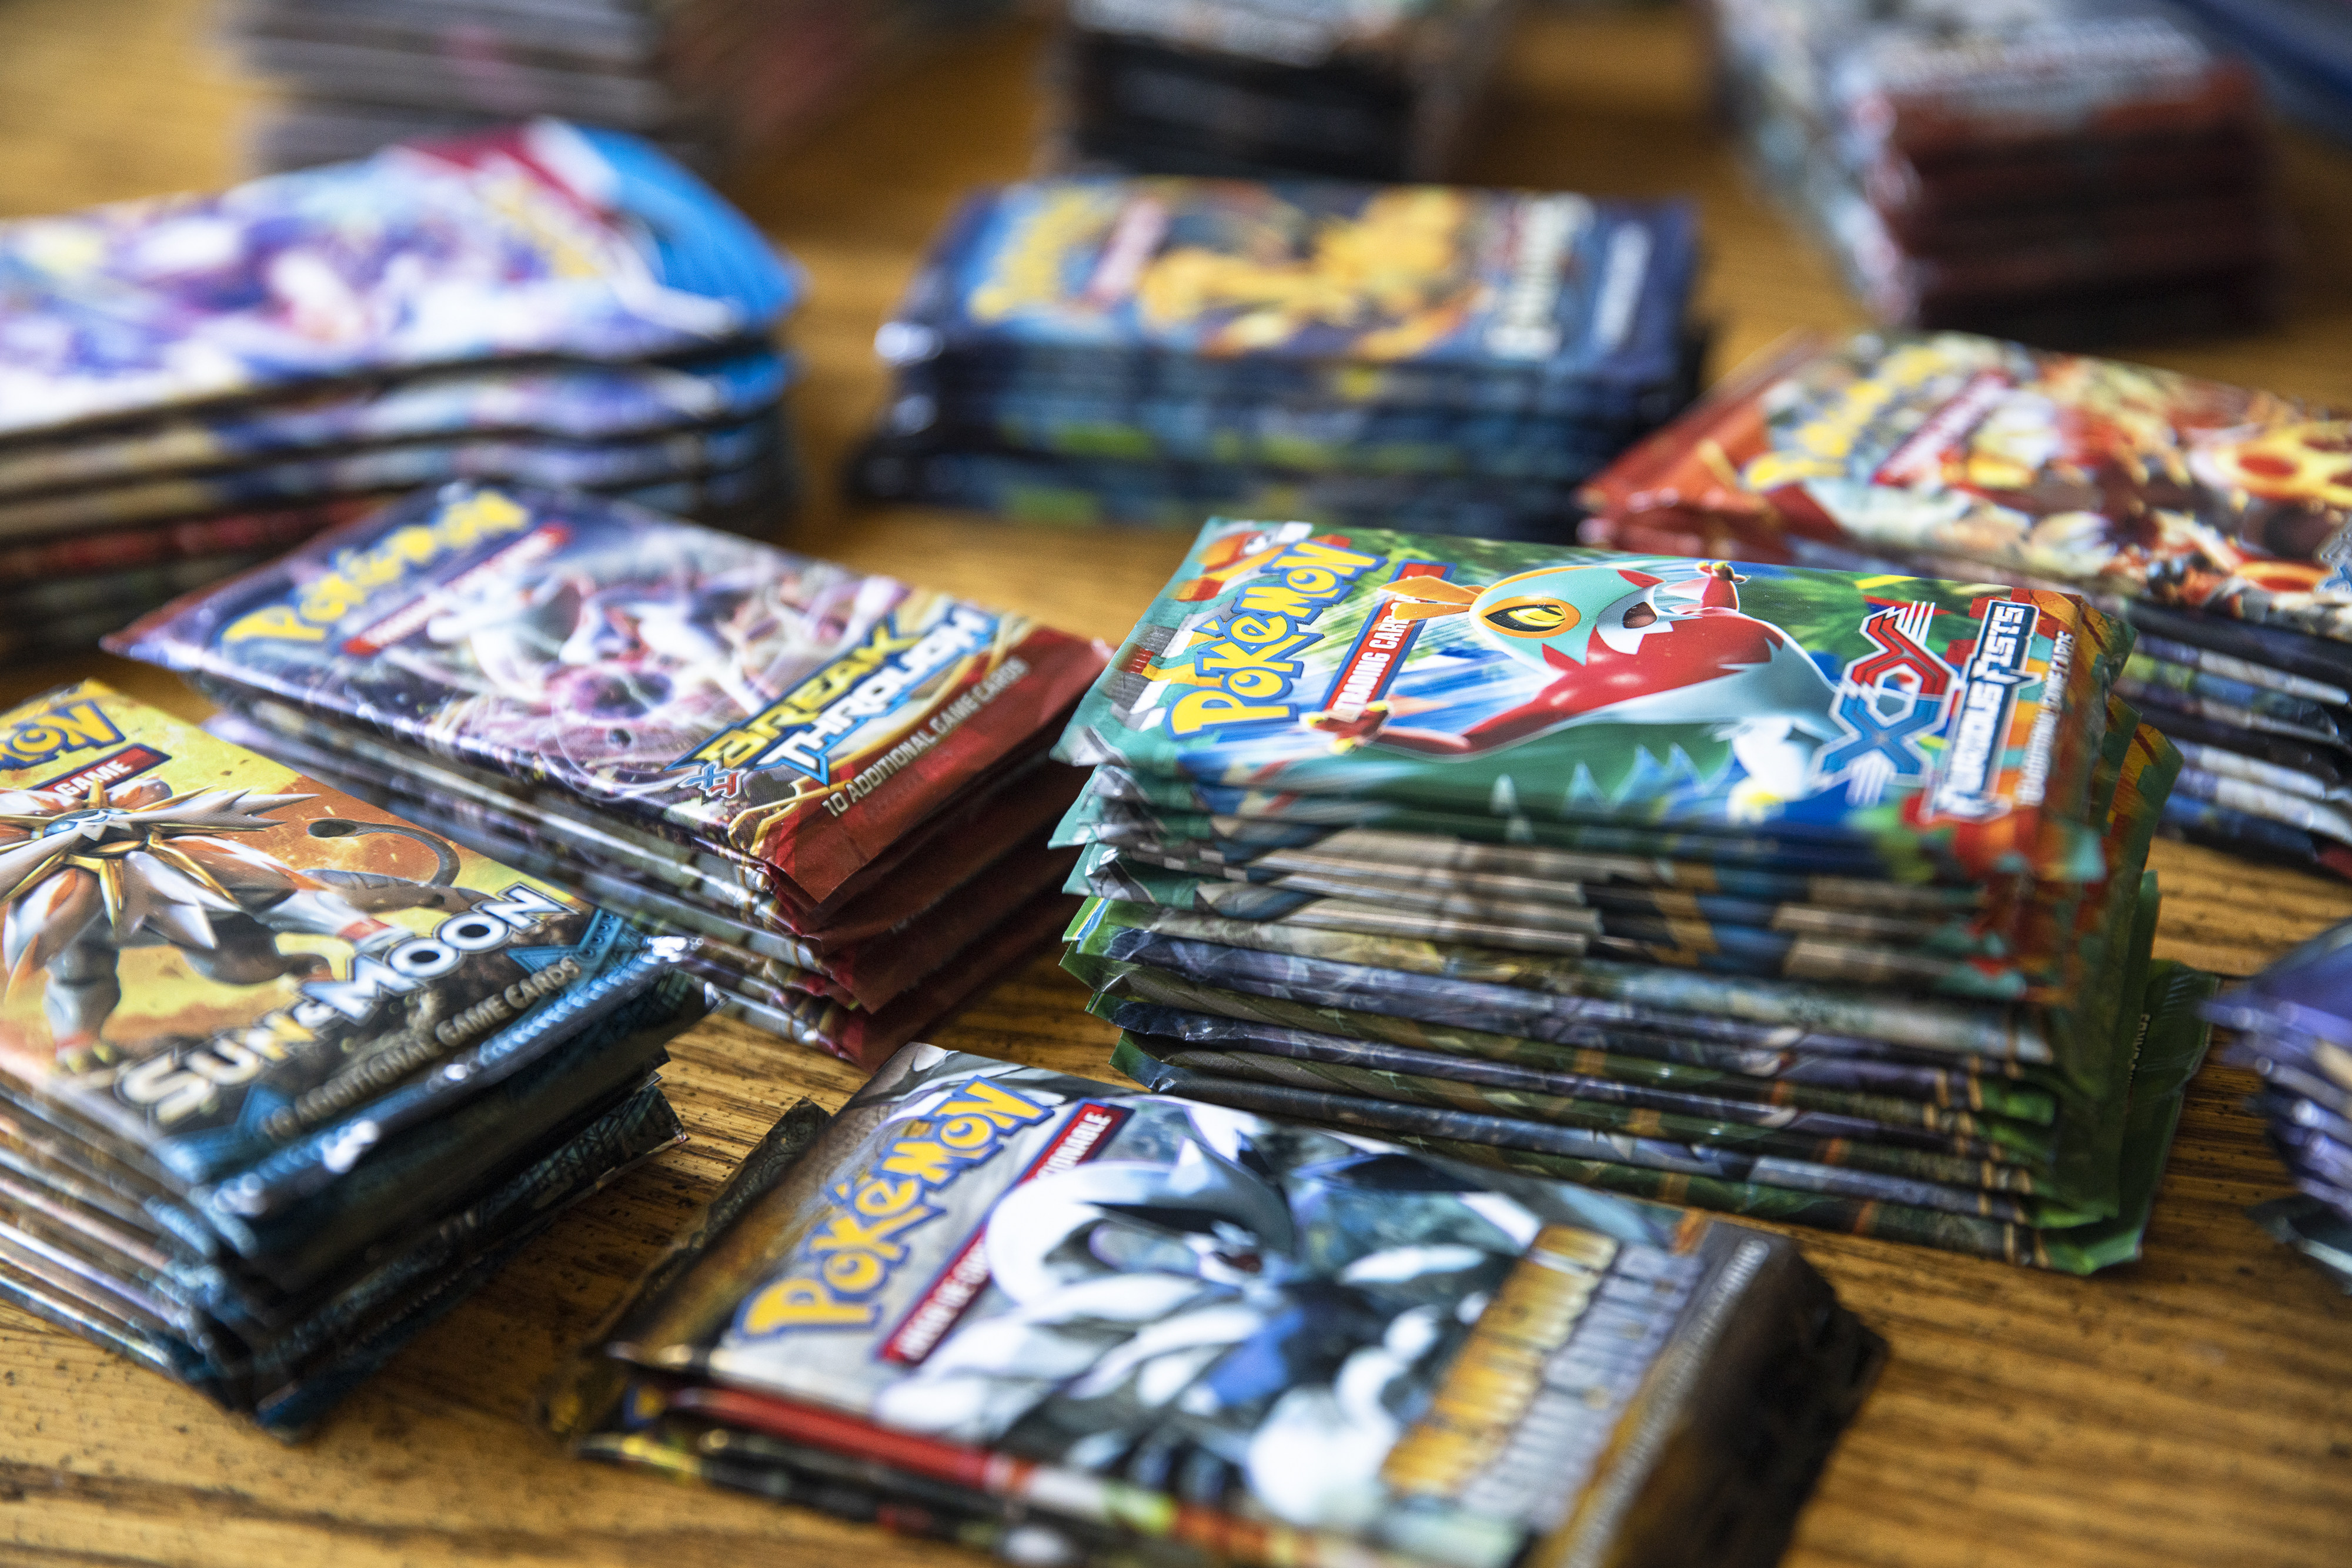 Collectibles such as Pokemon trading cards have seen a surge in value since the pandemic, with rare, mint-condition cards selling for millions. Photo: Bloomberg